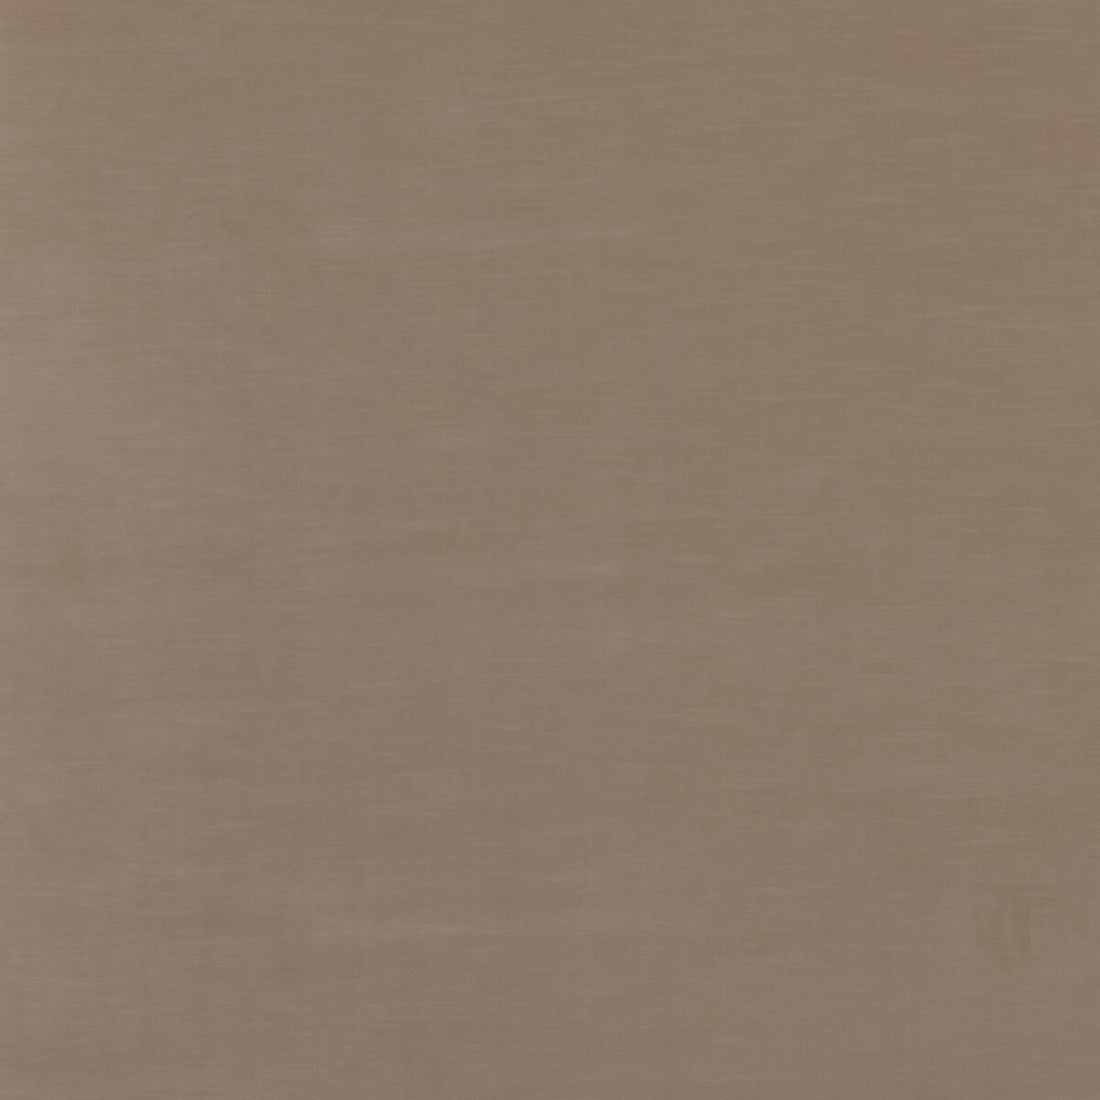 Quintessential Velvet fabric in nutmeg color - pattern ED85359.250.0 - by Threads in the Quintessential Velvet collection